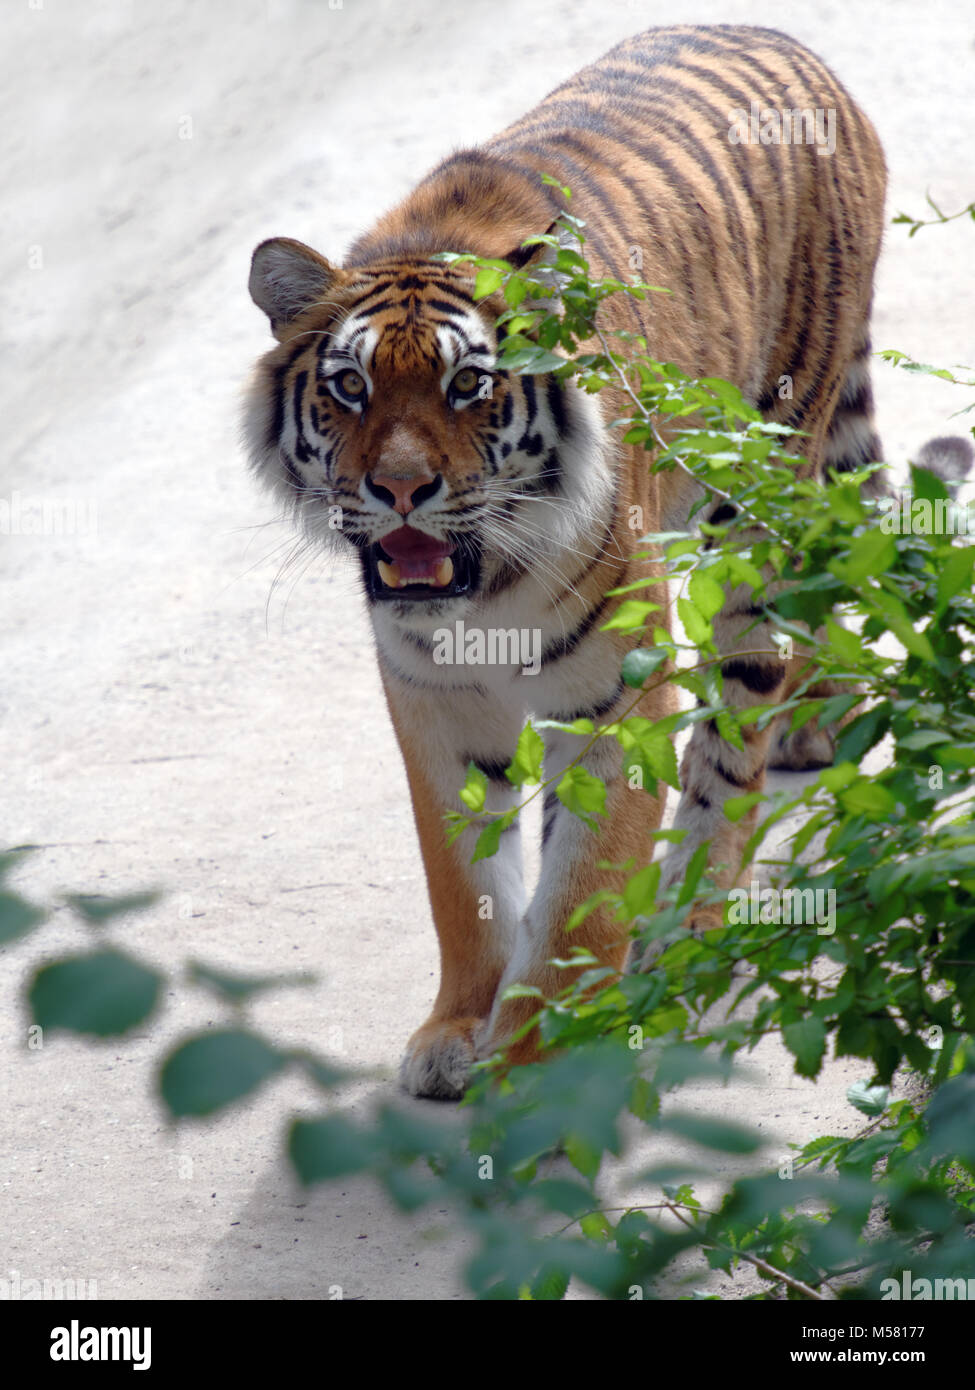 Growling tiger in a park Stock Photo